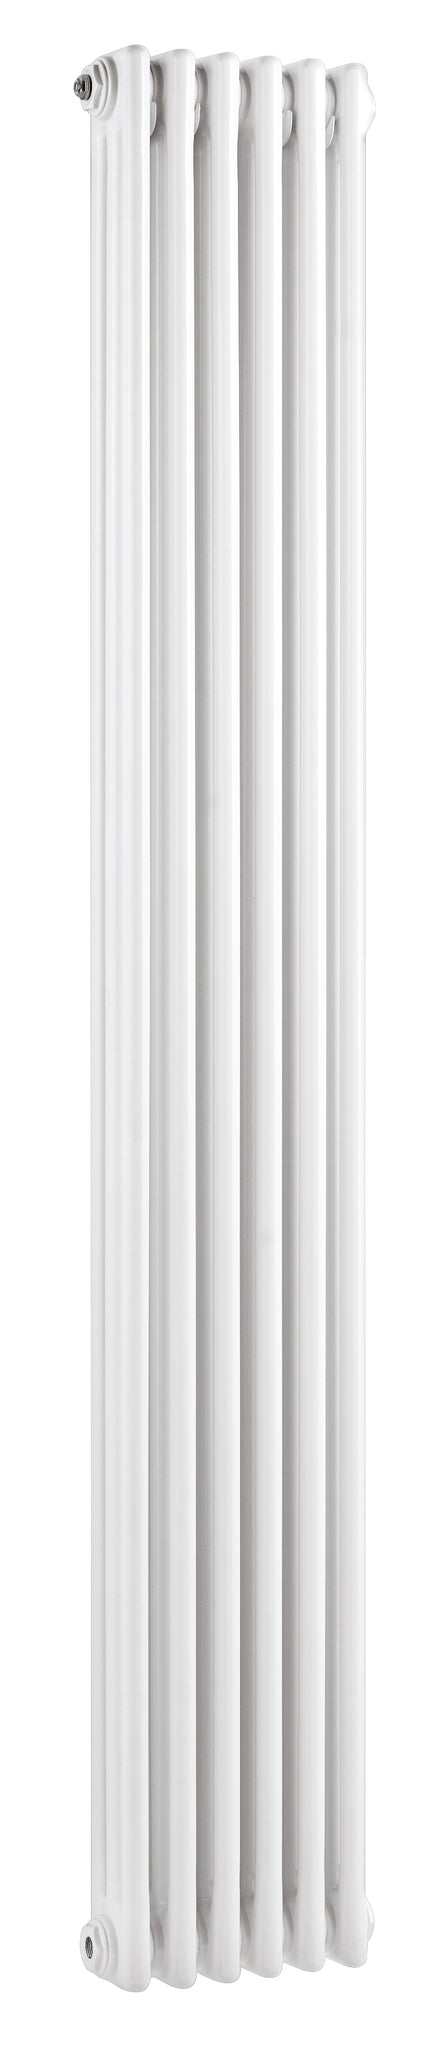 Hudson Reed Colosseum Traditional Triple Radiator 1800mmx287mm